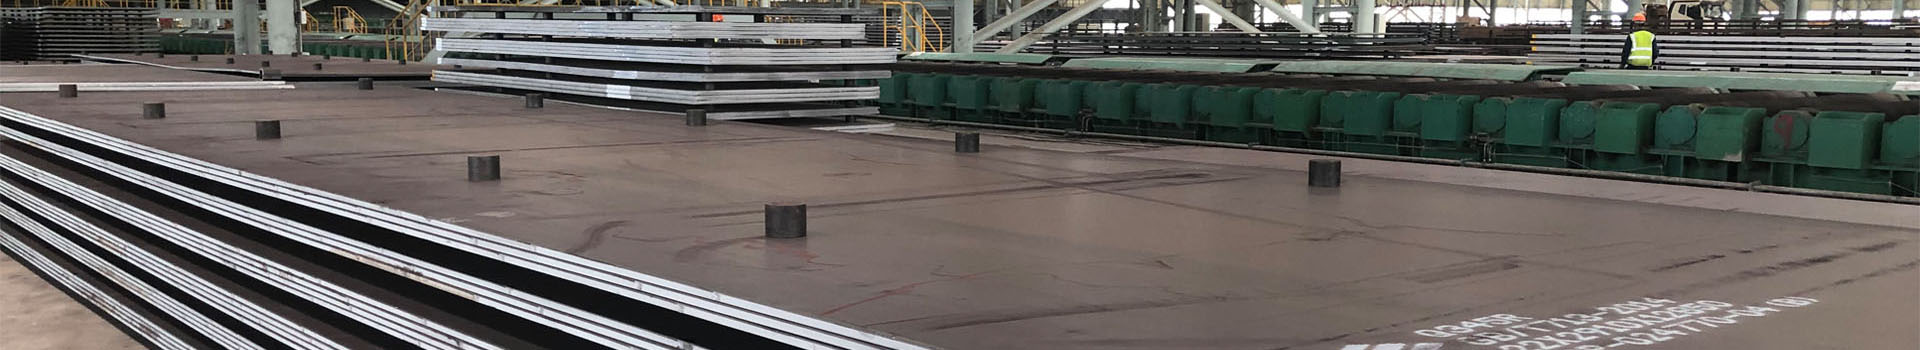 ASTM carbon and low alloy steel plates